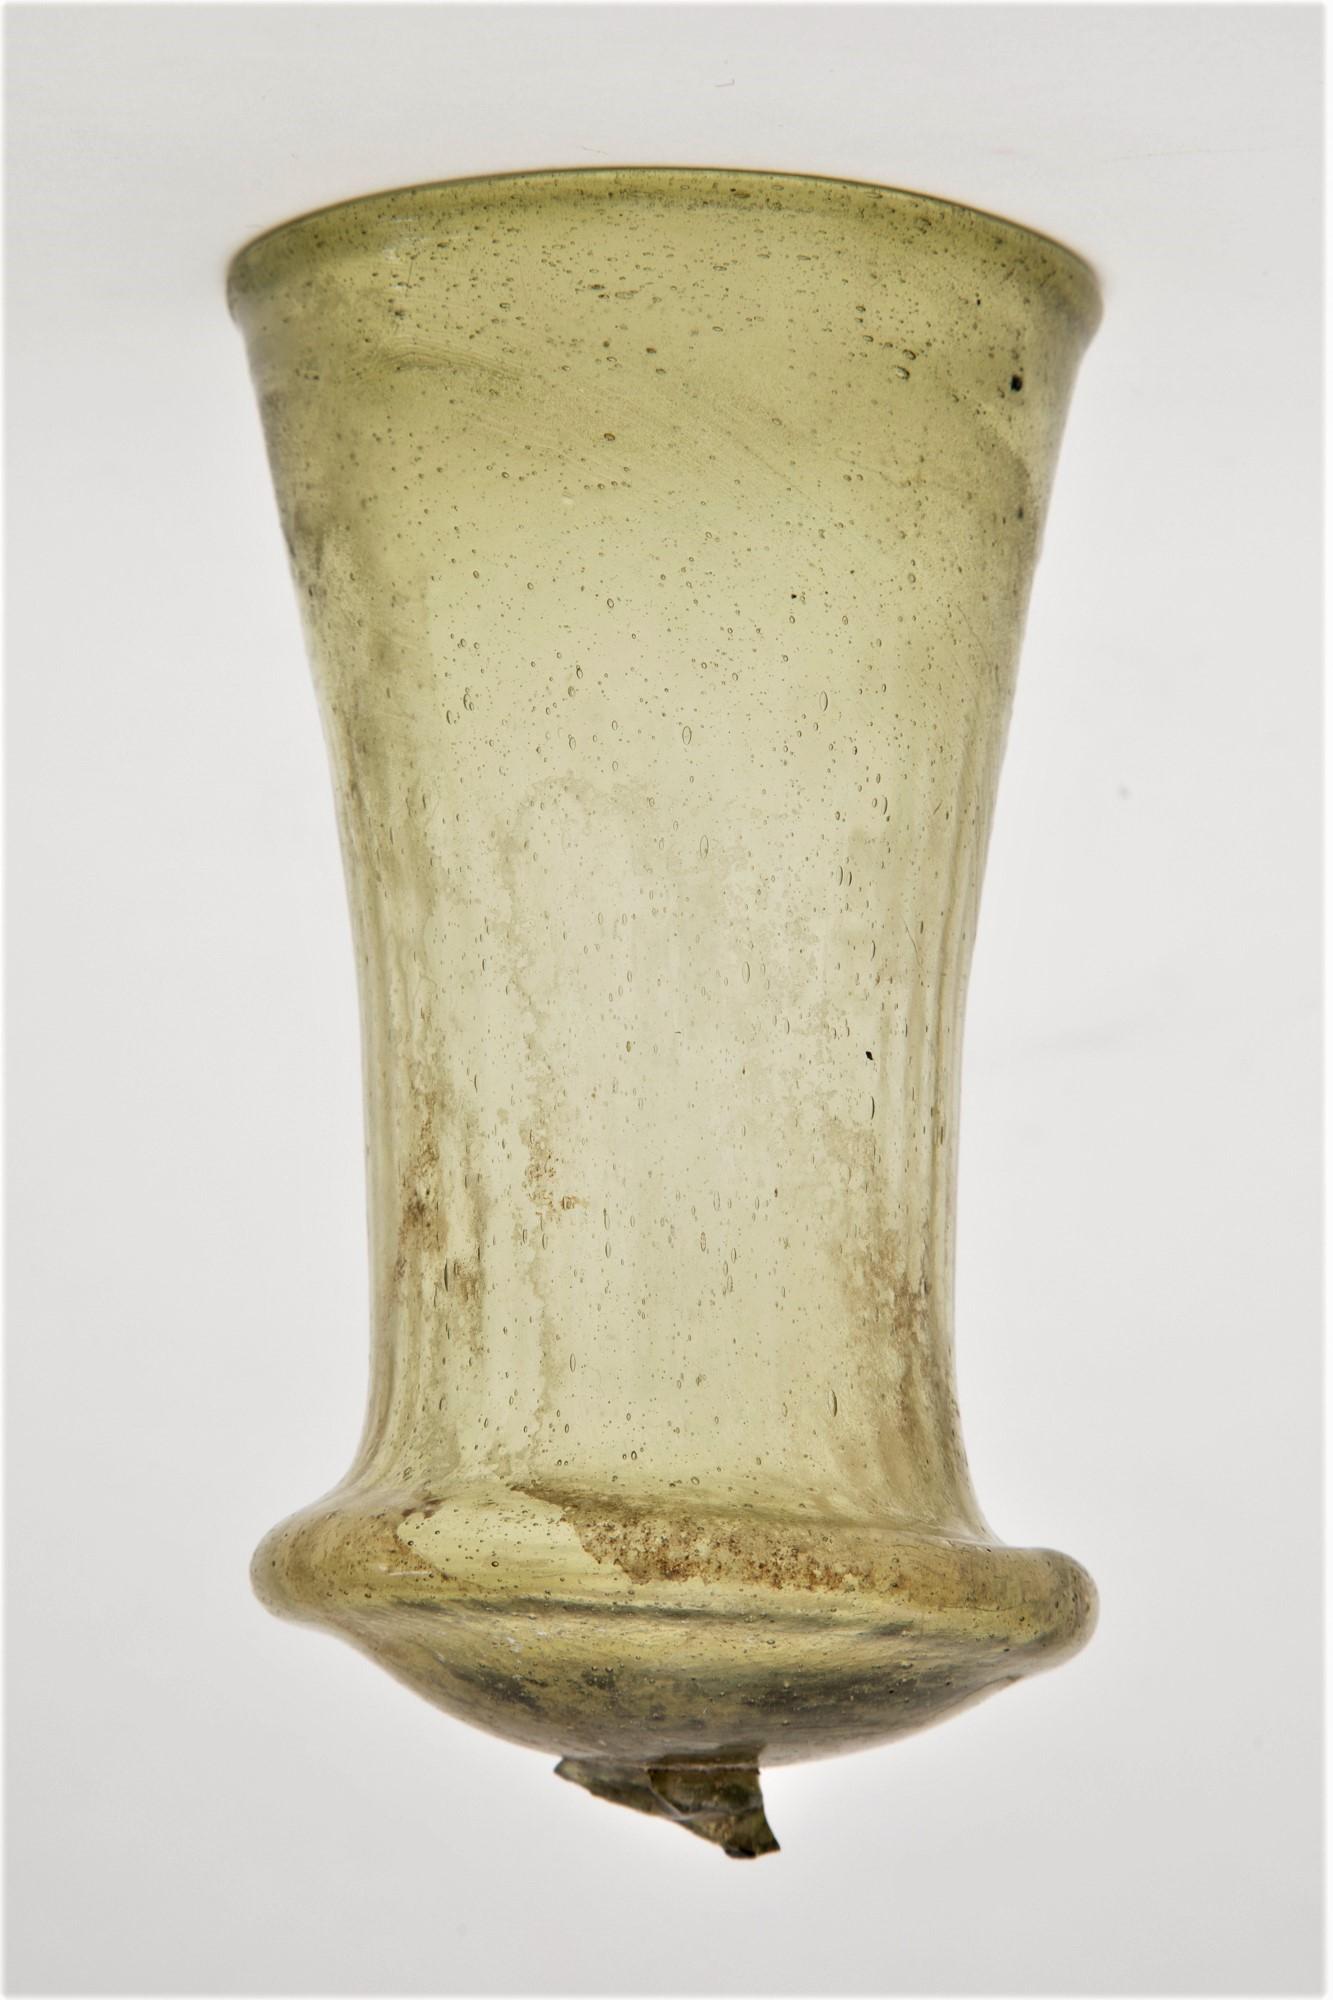 Late Roman Merovingian Glass Bell Beaker secular art from the Country: Germany / Krefeld. Culture: Merovingian.Date: 6th century AD.Material: Pale yellow, pattern molded, transparent glass. Decorated with thin vertical ribs. Conical in form with